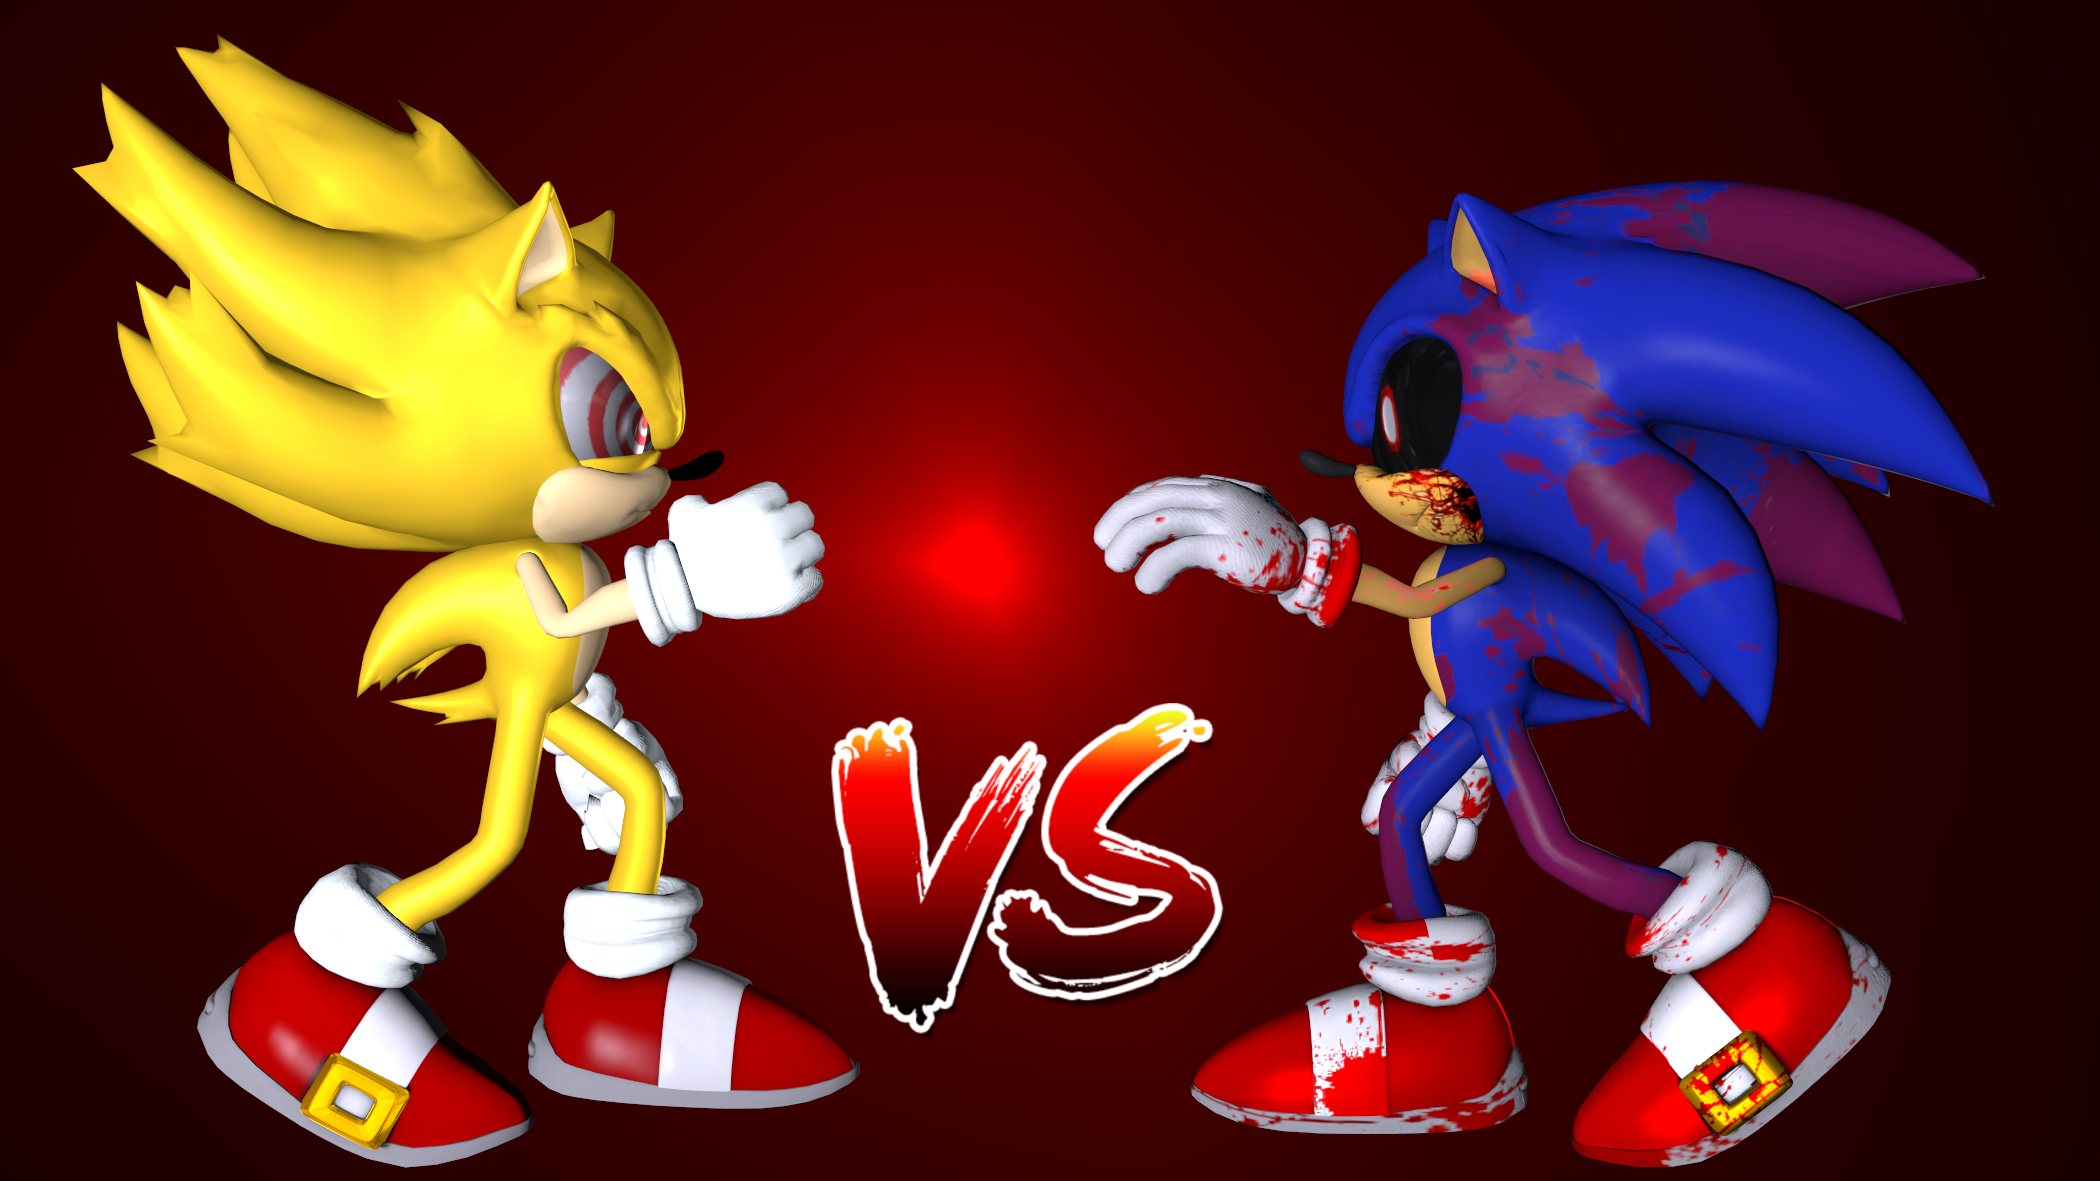 NEW SONIC/SUPER SONIC/EXETIOR/FLEETWAY SUPER SONIC PARTS! - FNF vs Sonic.EXE  : X Event by l left